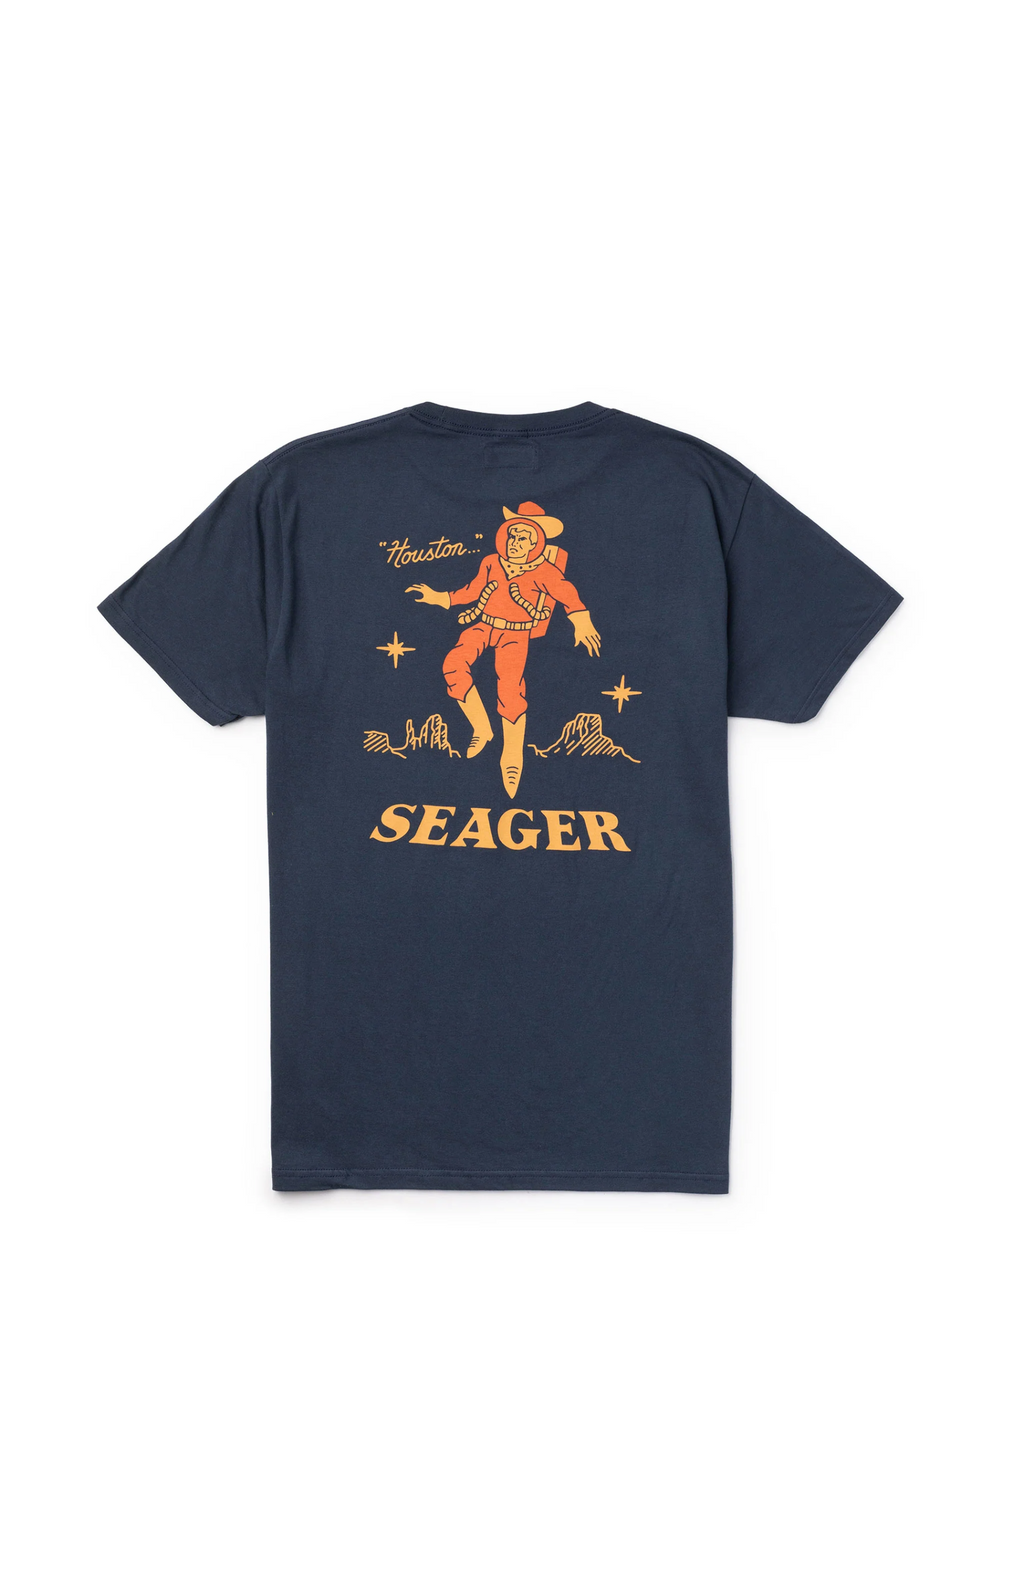 Seager - Space Cowboy Tee